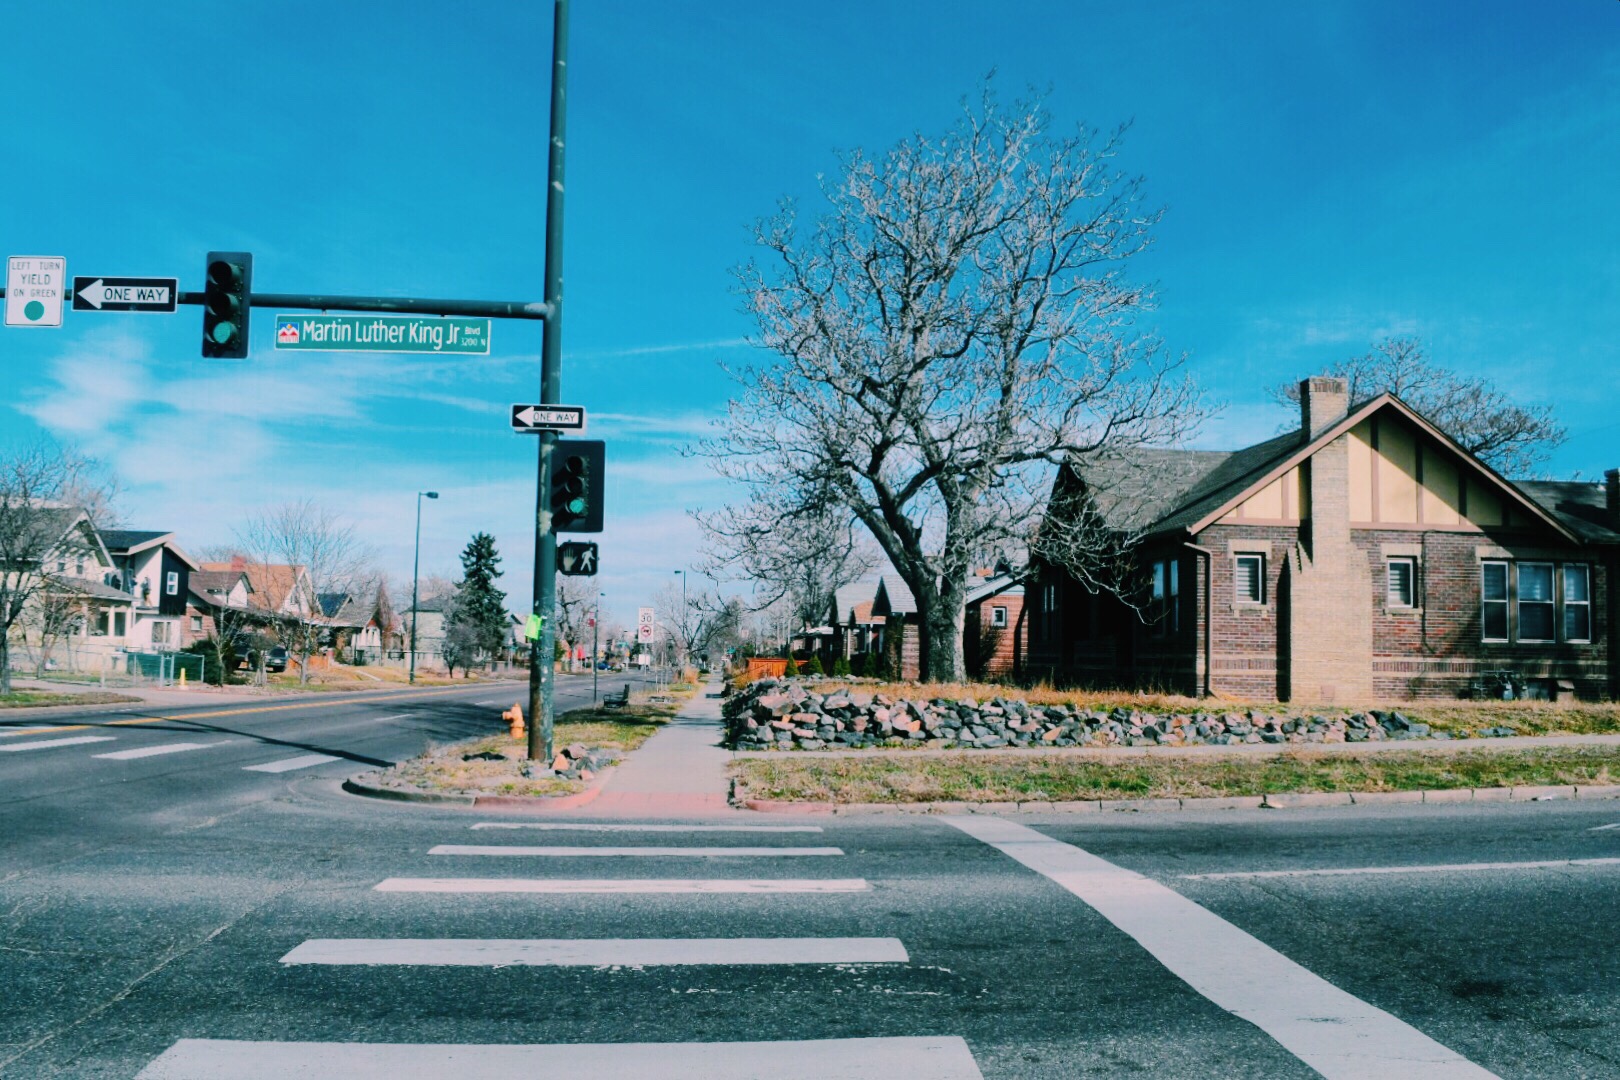 How To Find The Right Neighborhood in Denver